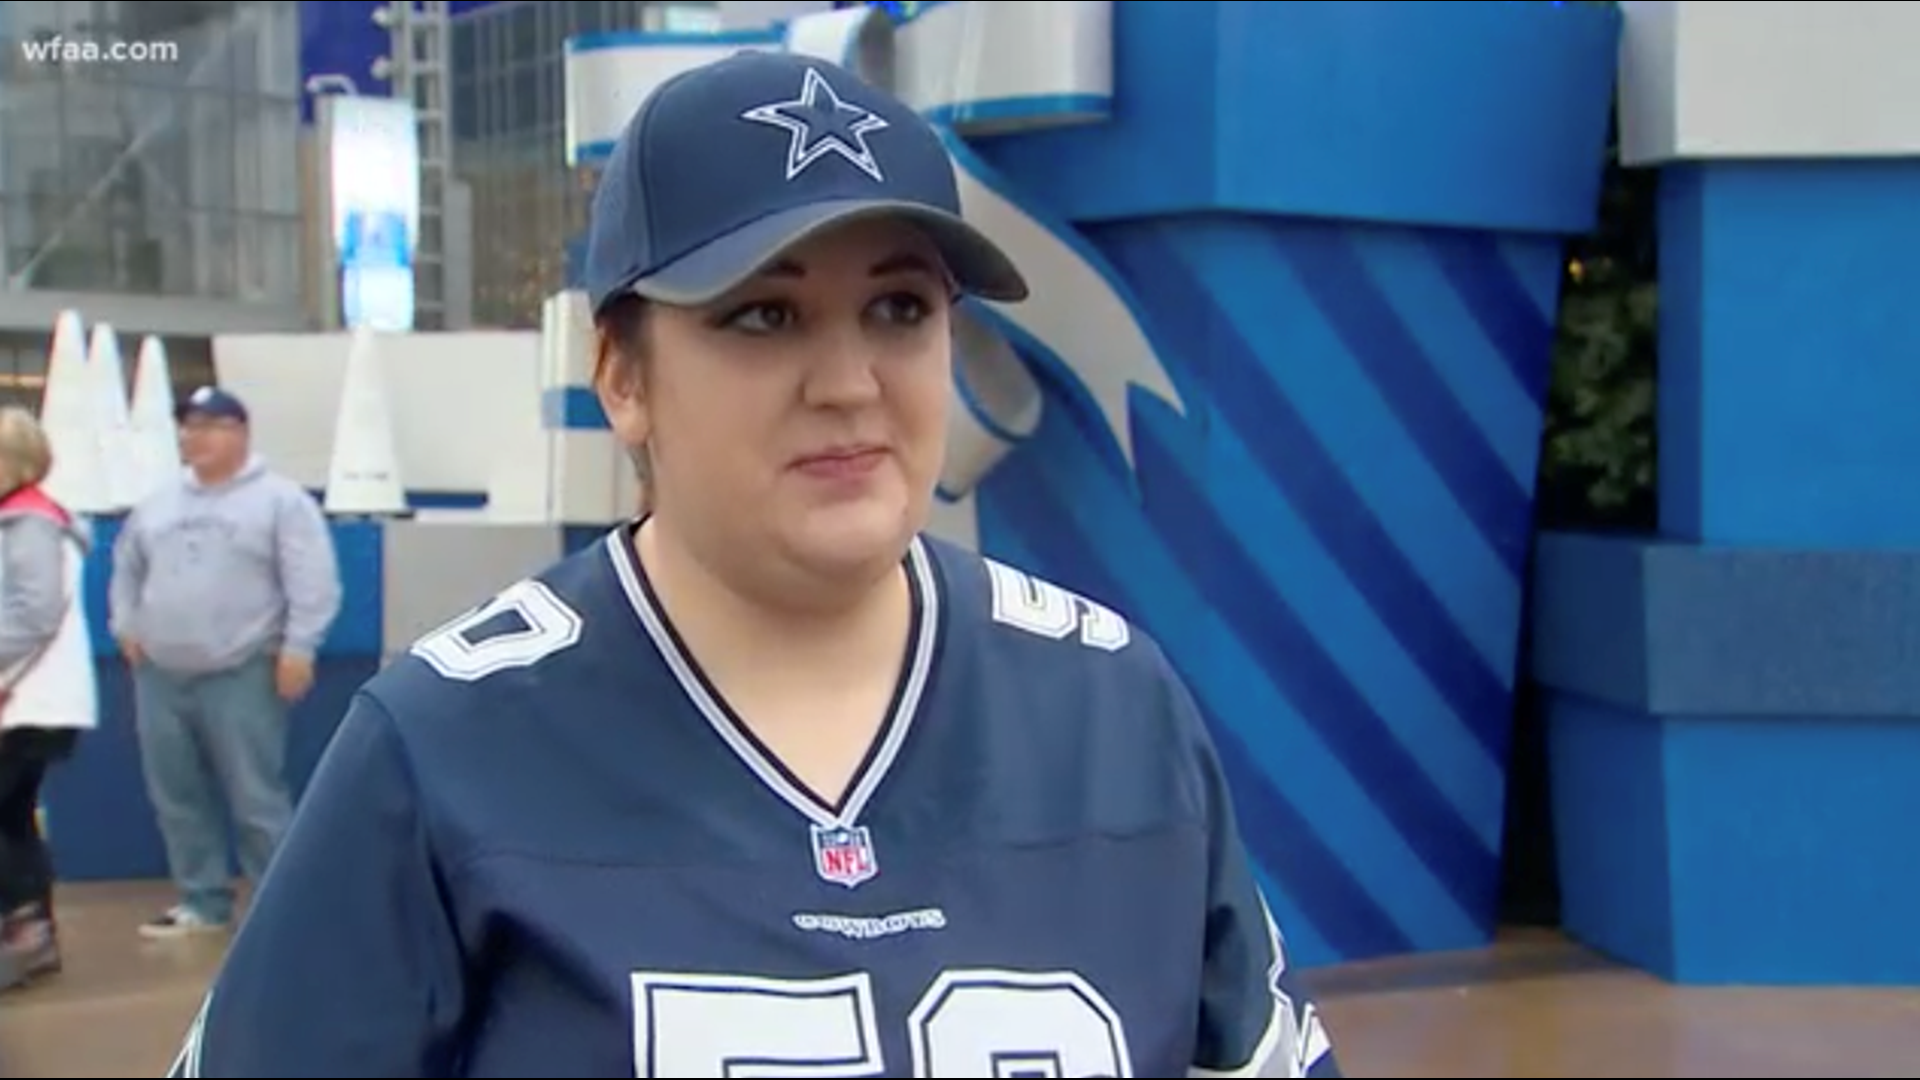 Fans at the Star in Frisco say anything is still possible. They say they will support the Cowboys no matter what happens.